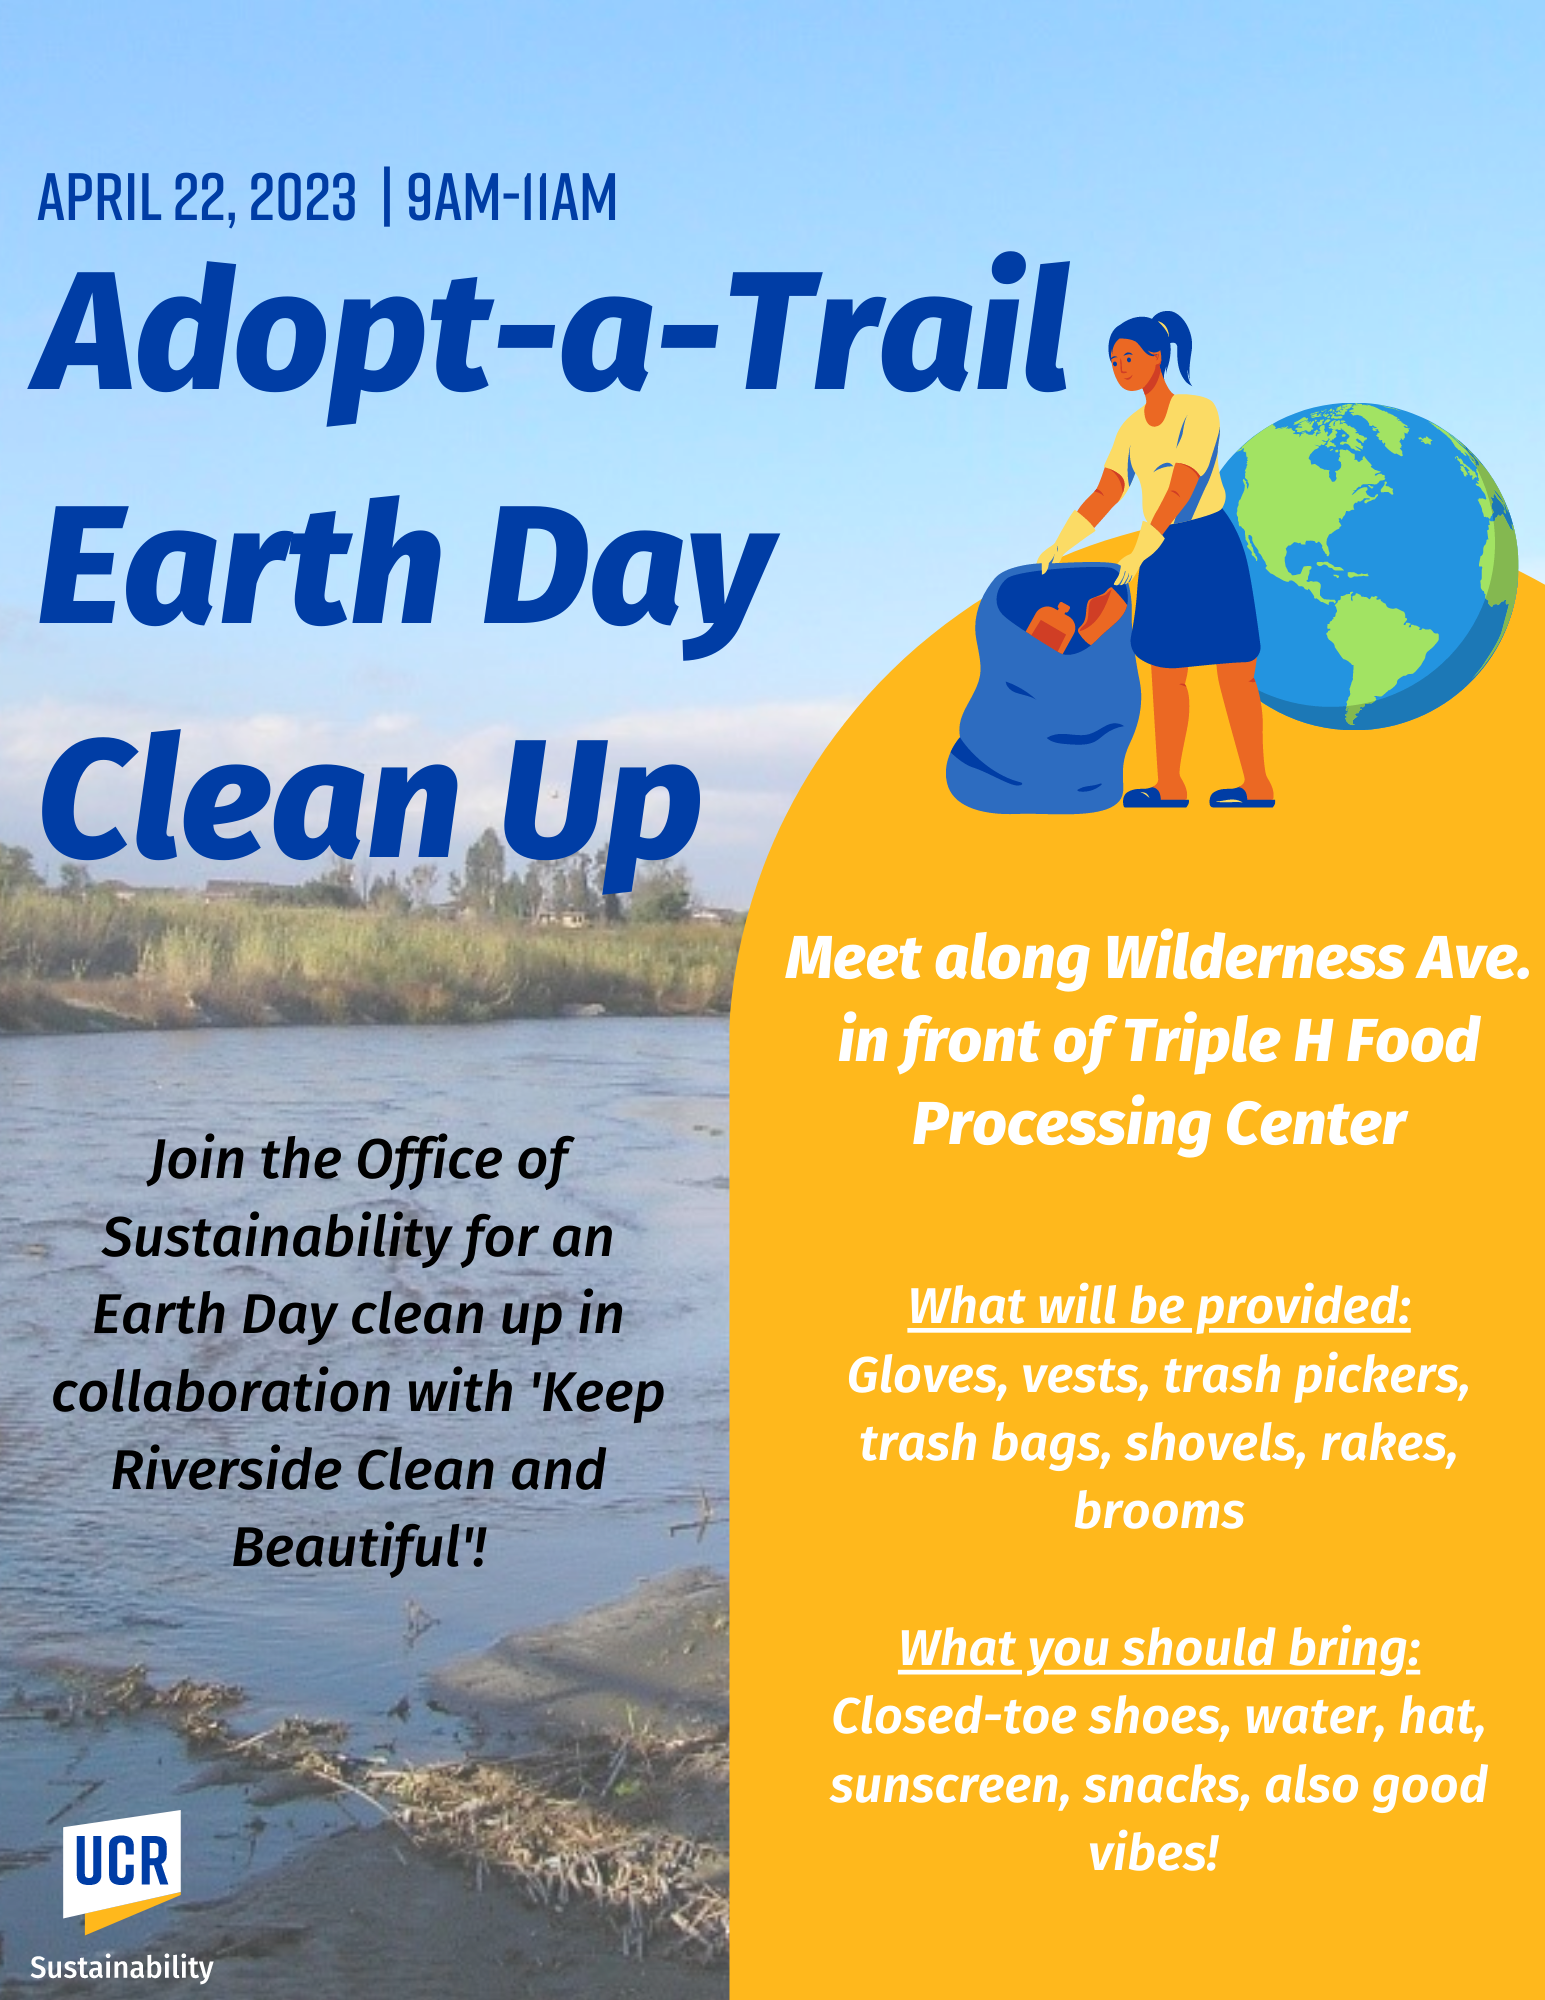 Adopt-a-trail Earth Day Clean Up 